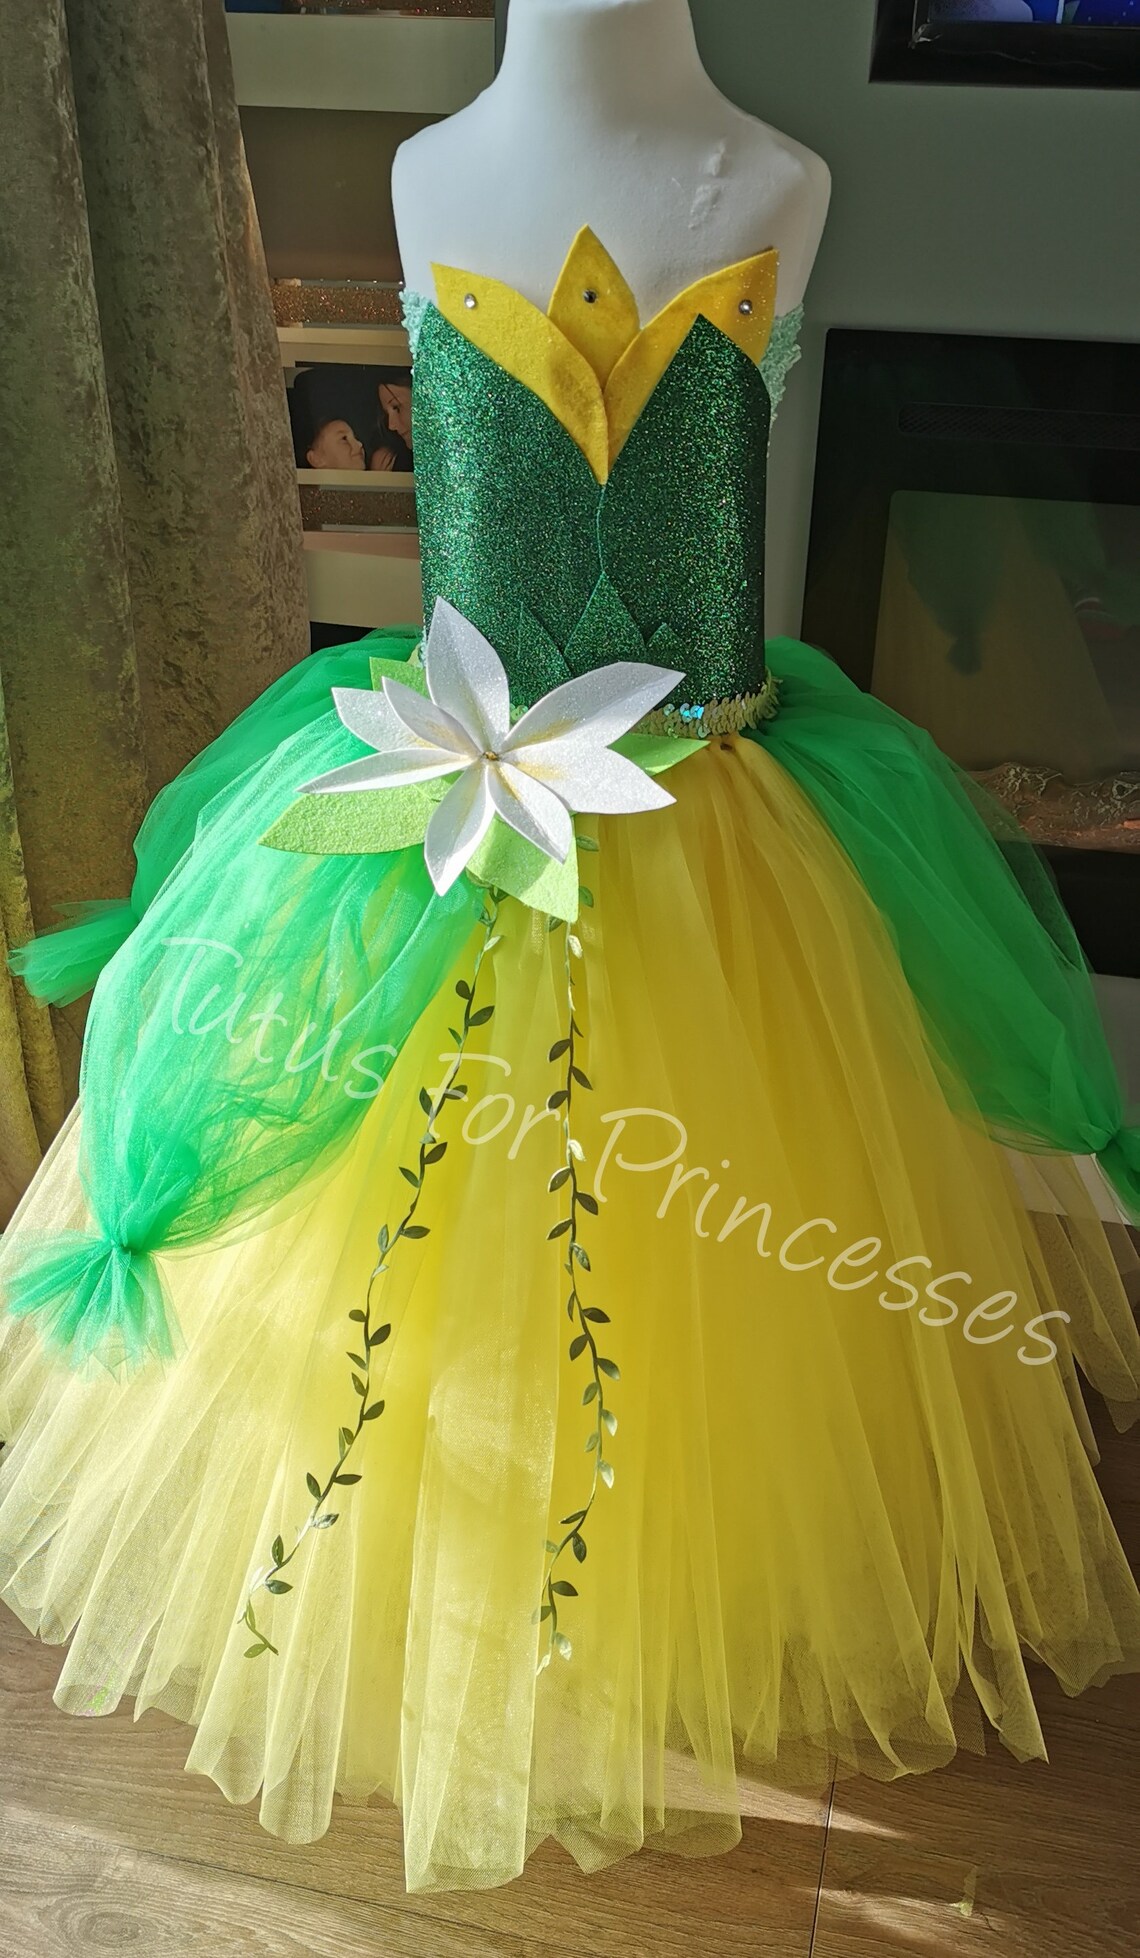 Tiana tutu Ballgown dress inspired by Princess and the Frog. | Etsy